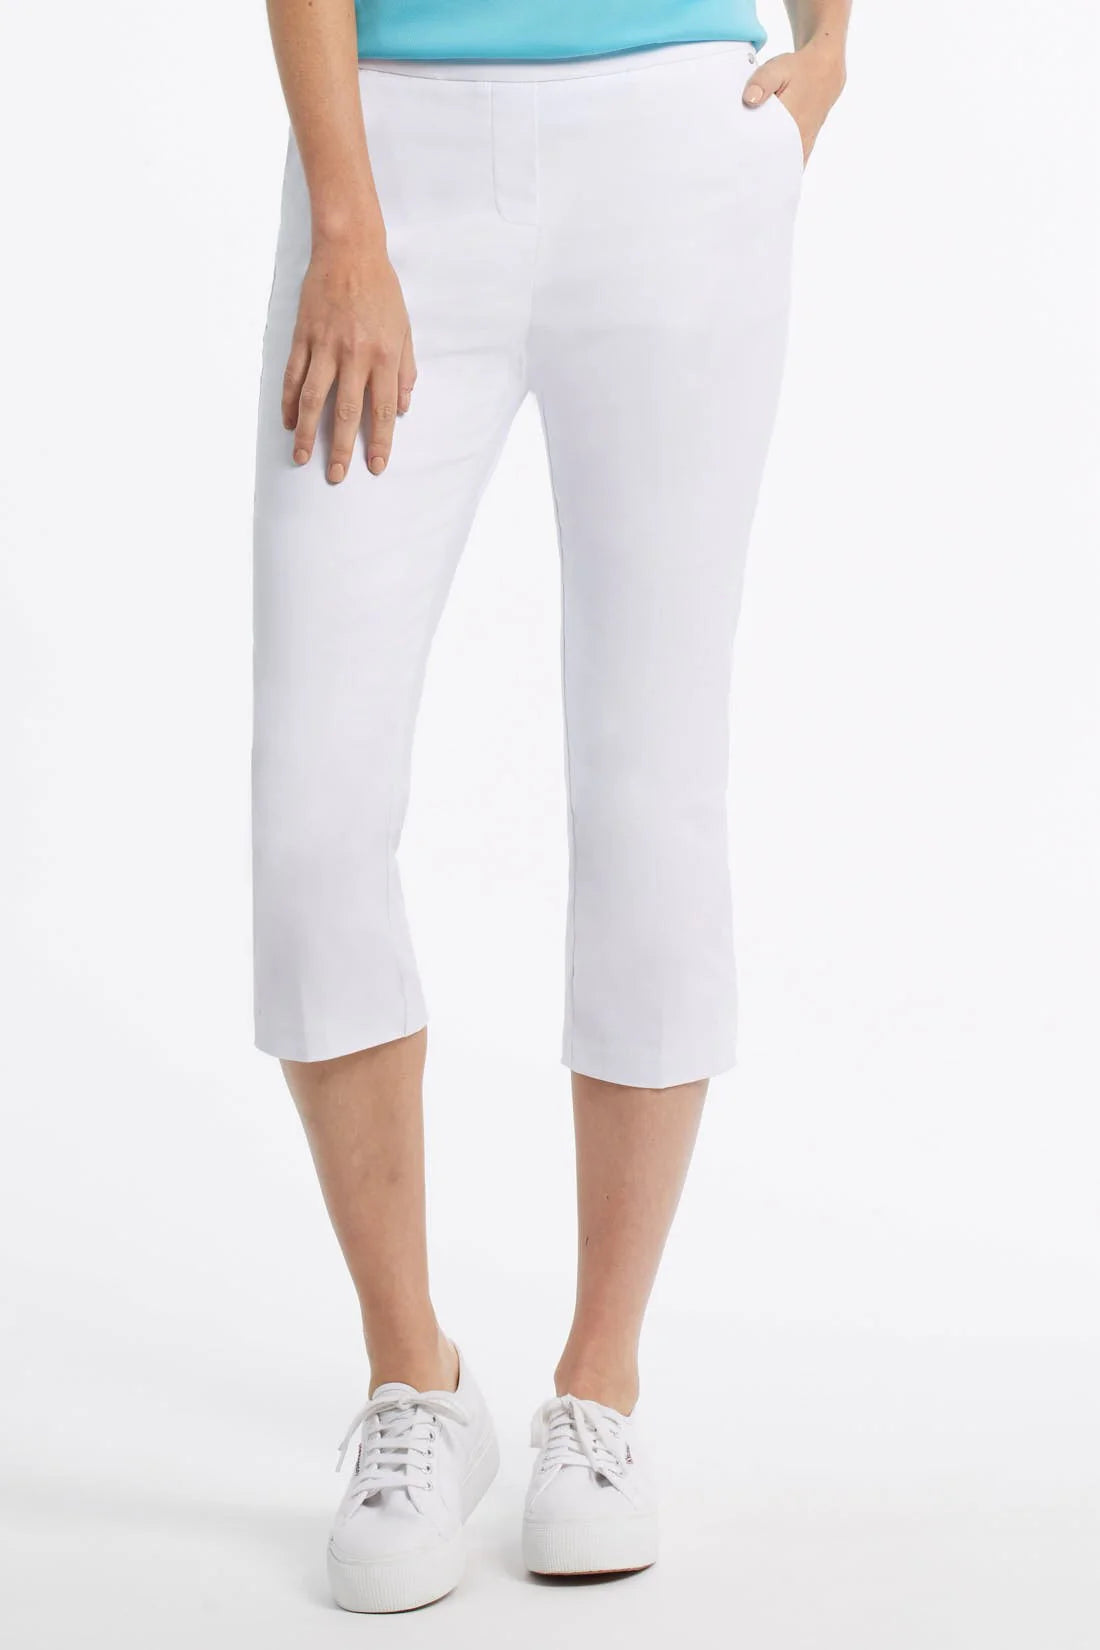 There's a reason these chic capris are one of our best-selling pieces--from the tummy slimming FLATTEN IT® technology to the pull-on waist, signature Century Stretch twill fabric and pocket details. These ultra-flattering 22" pants are made to take you through your day, or night, in comfort and style.